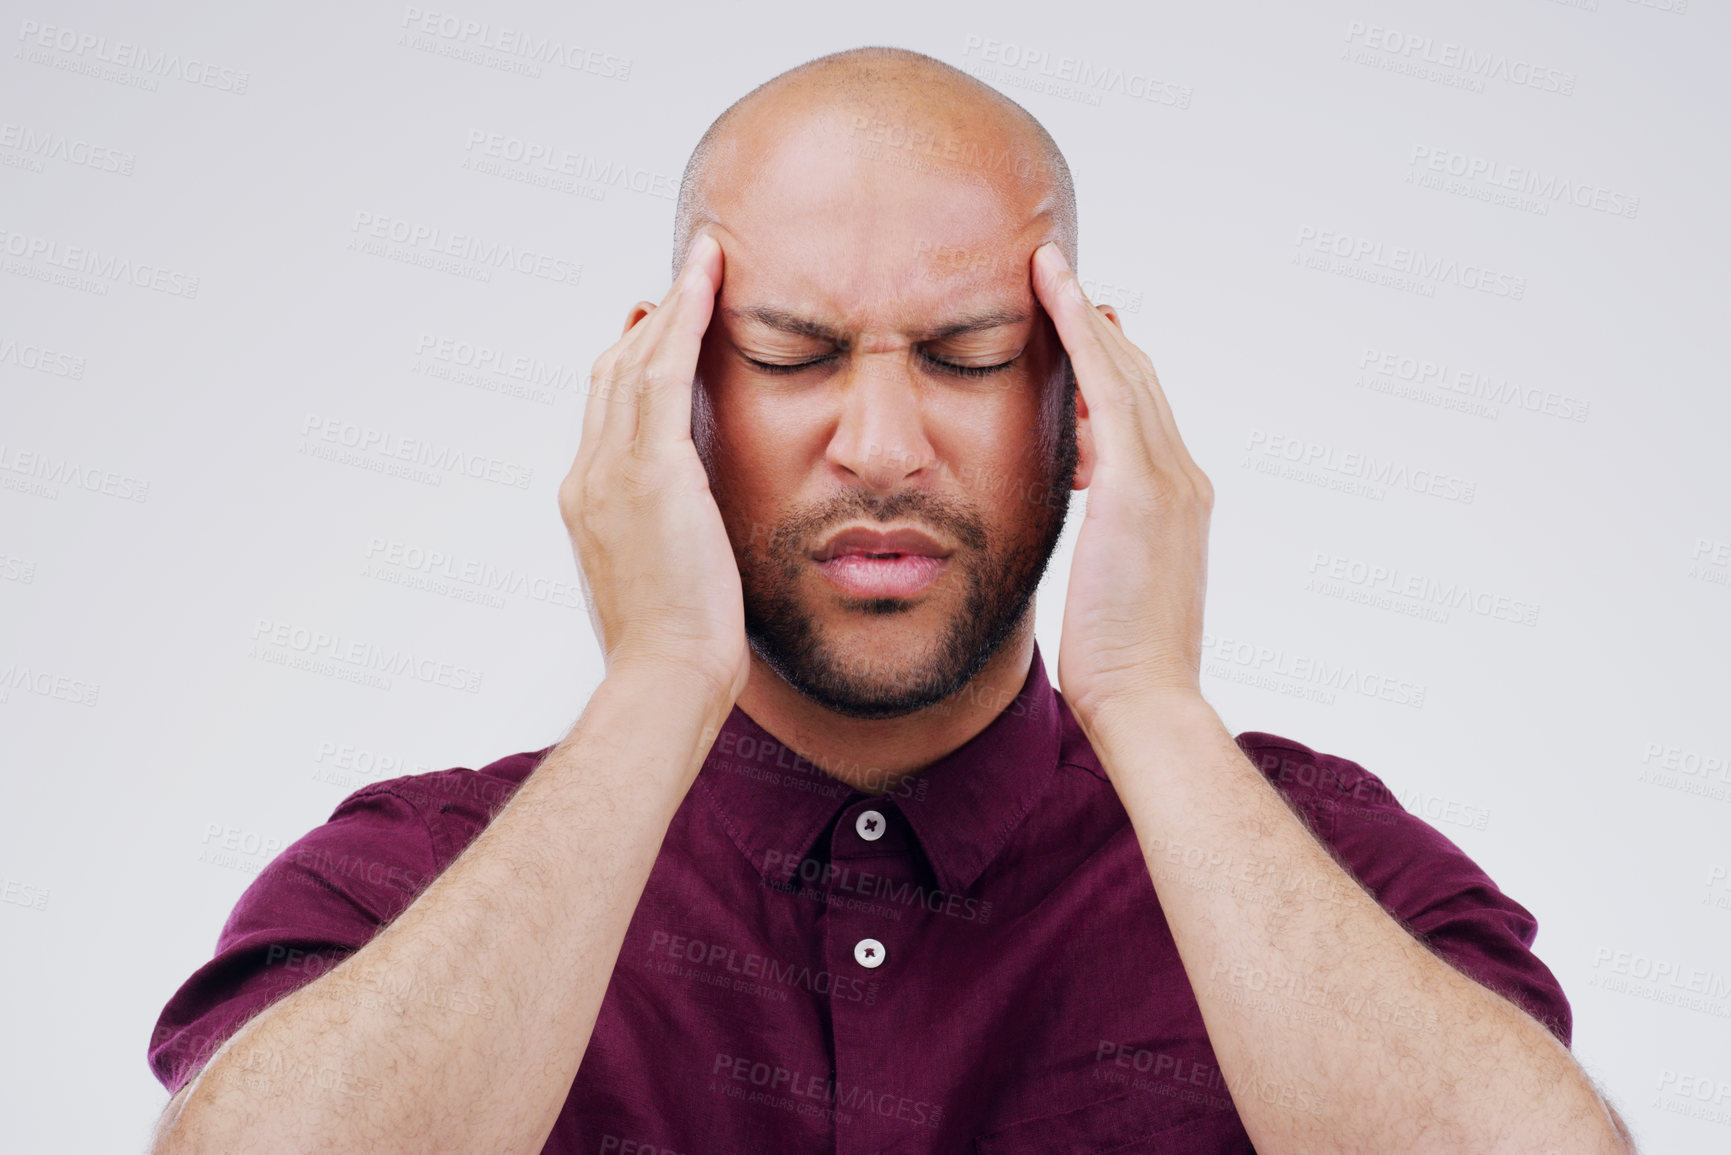 Buy stock photo Shot of a young man holding his head while suffering from a headache against a grey background